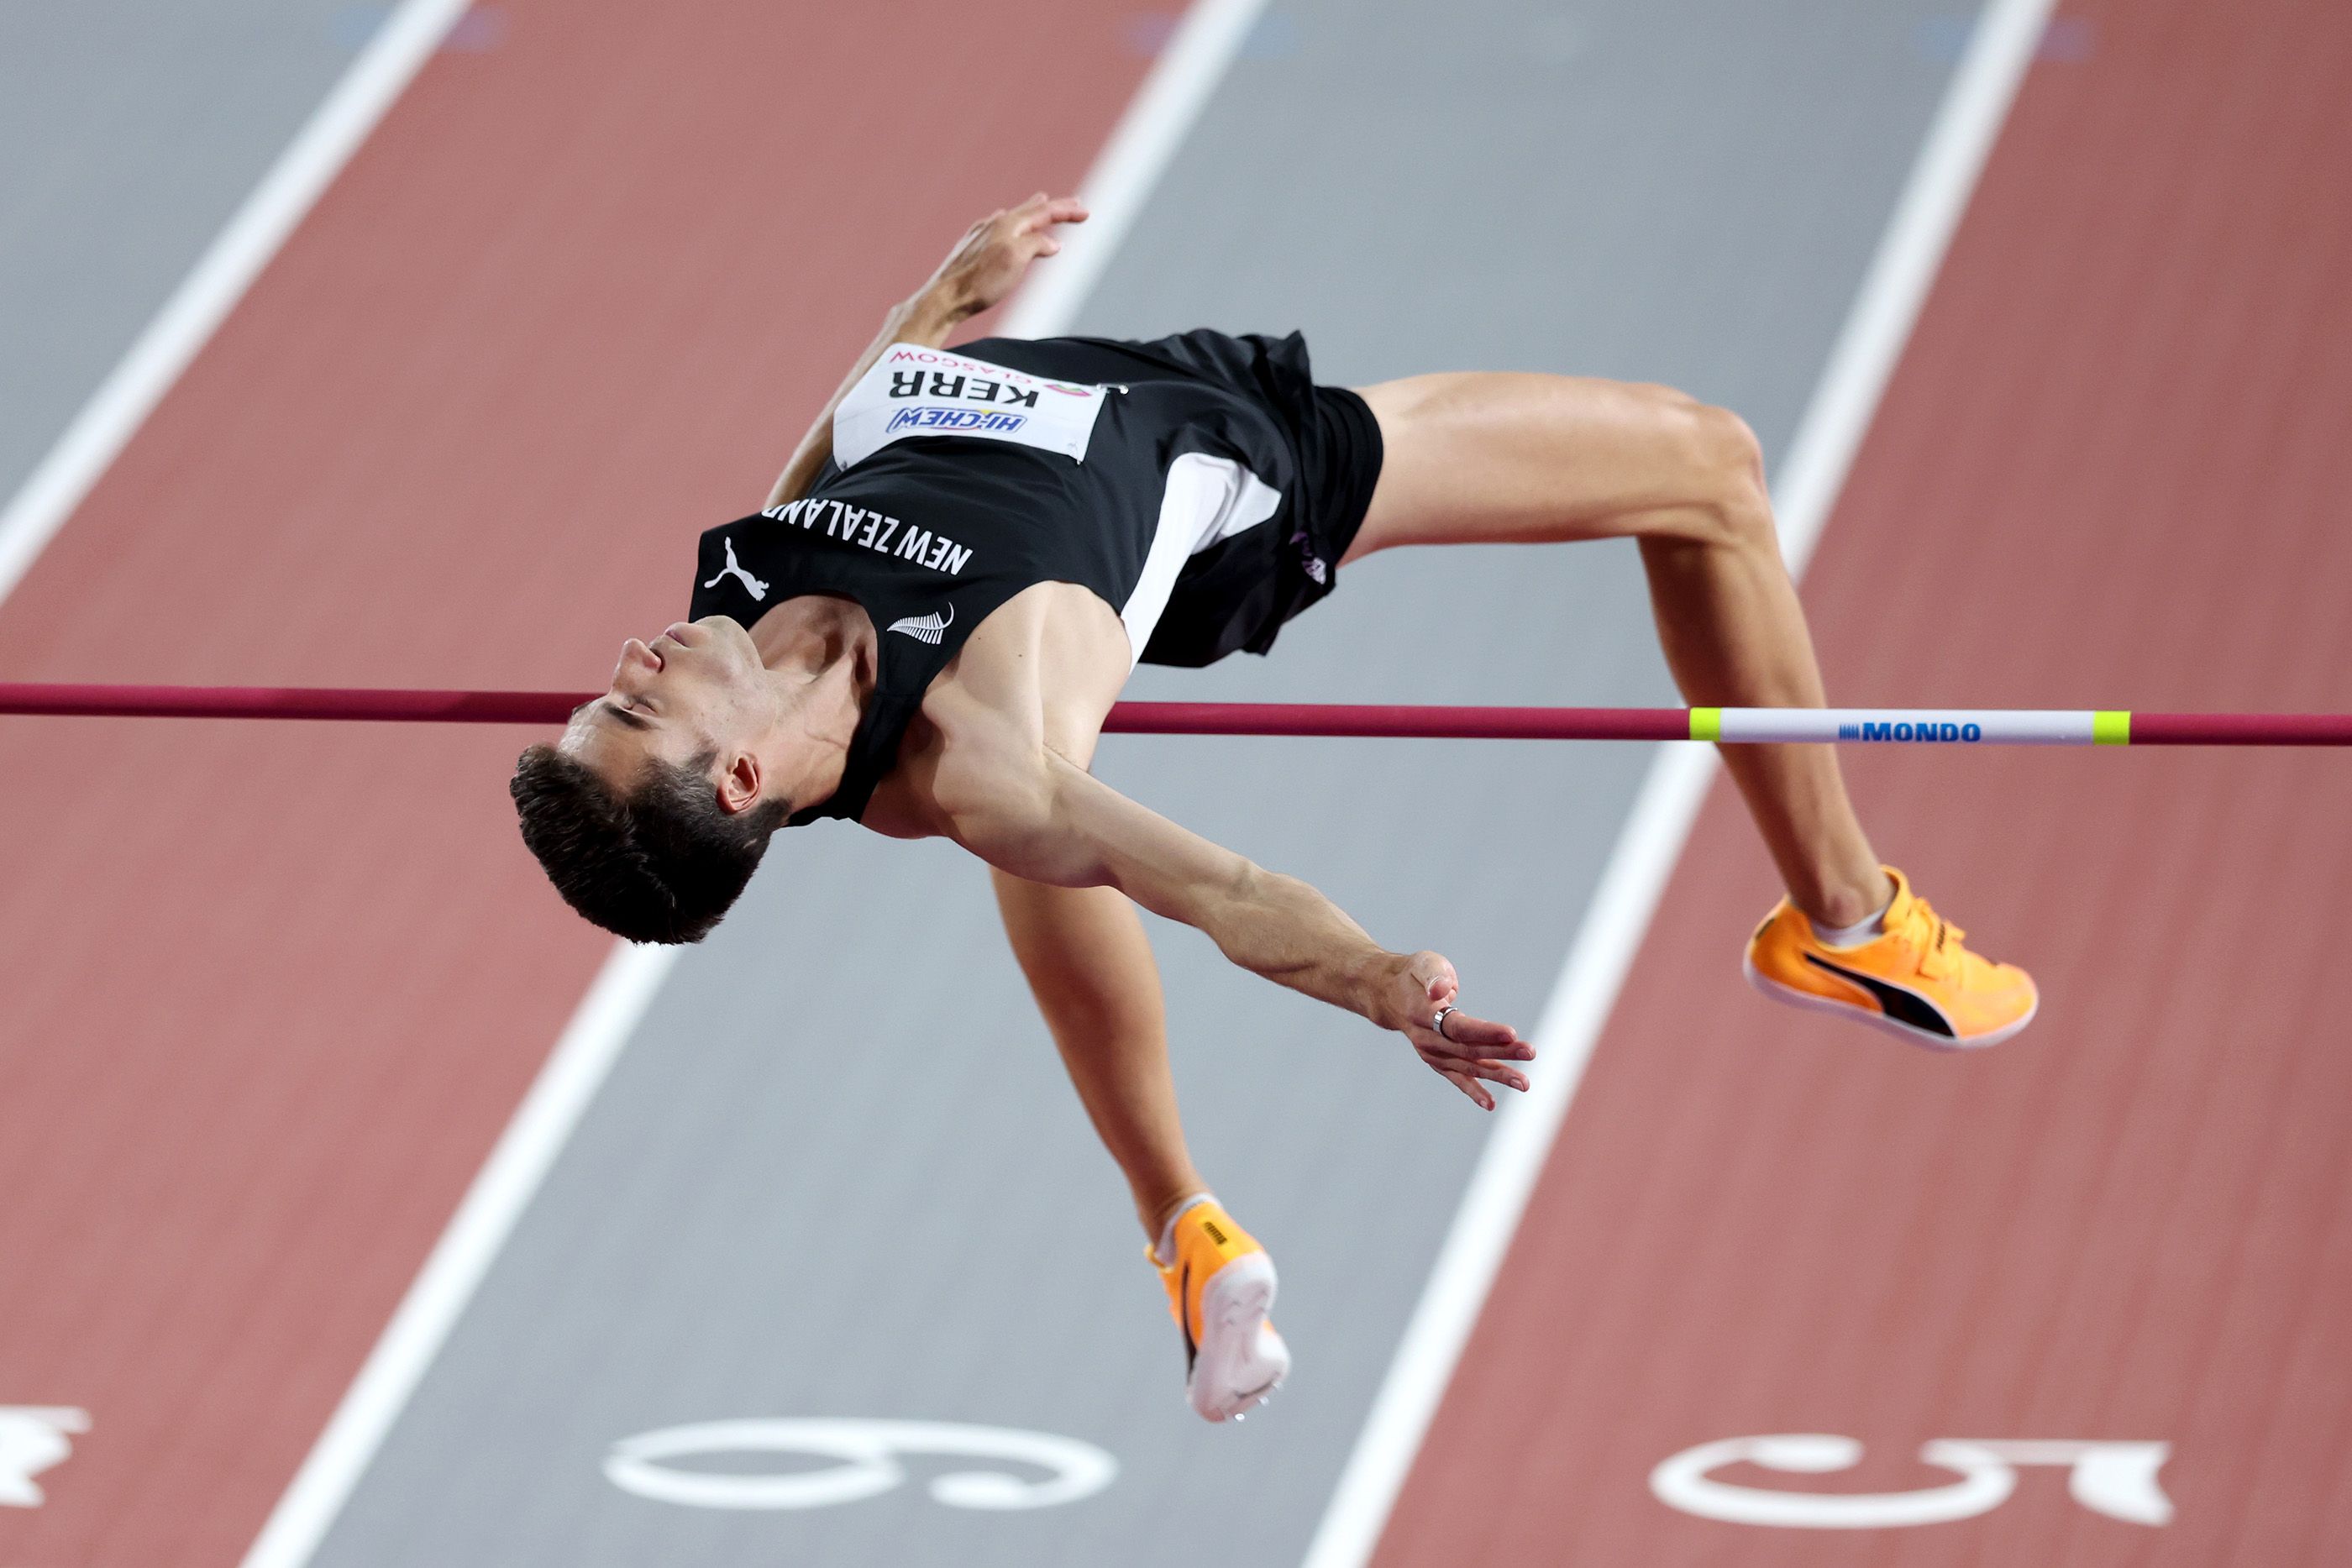 Hamish Kerr competes at the World Indoor Championships in Glasgow